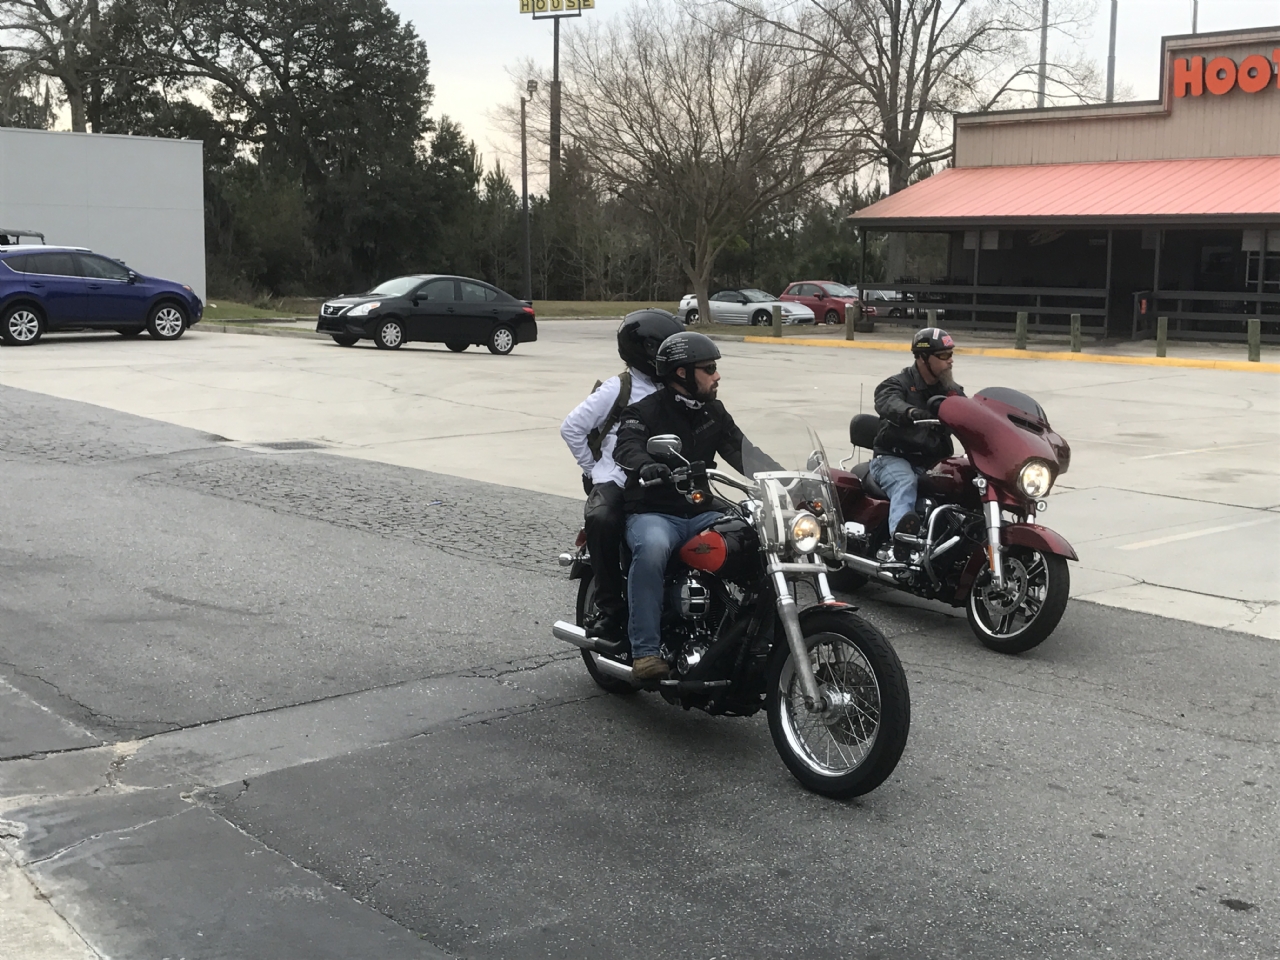 Our 1st attempt at hosting a Poker Run as a Fundraiser! 
We had a great turnout and learned a lot.